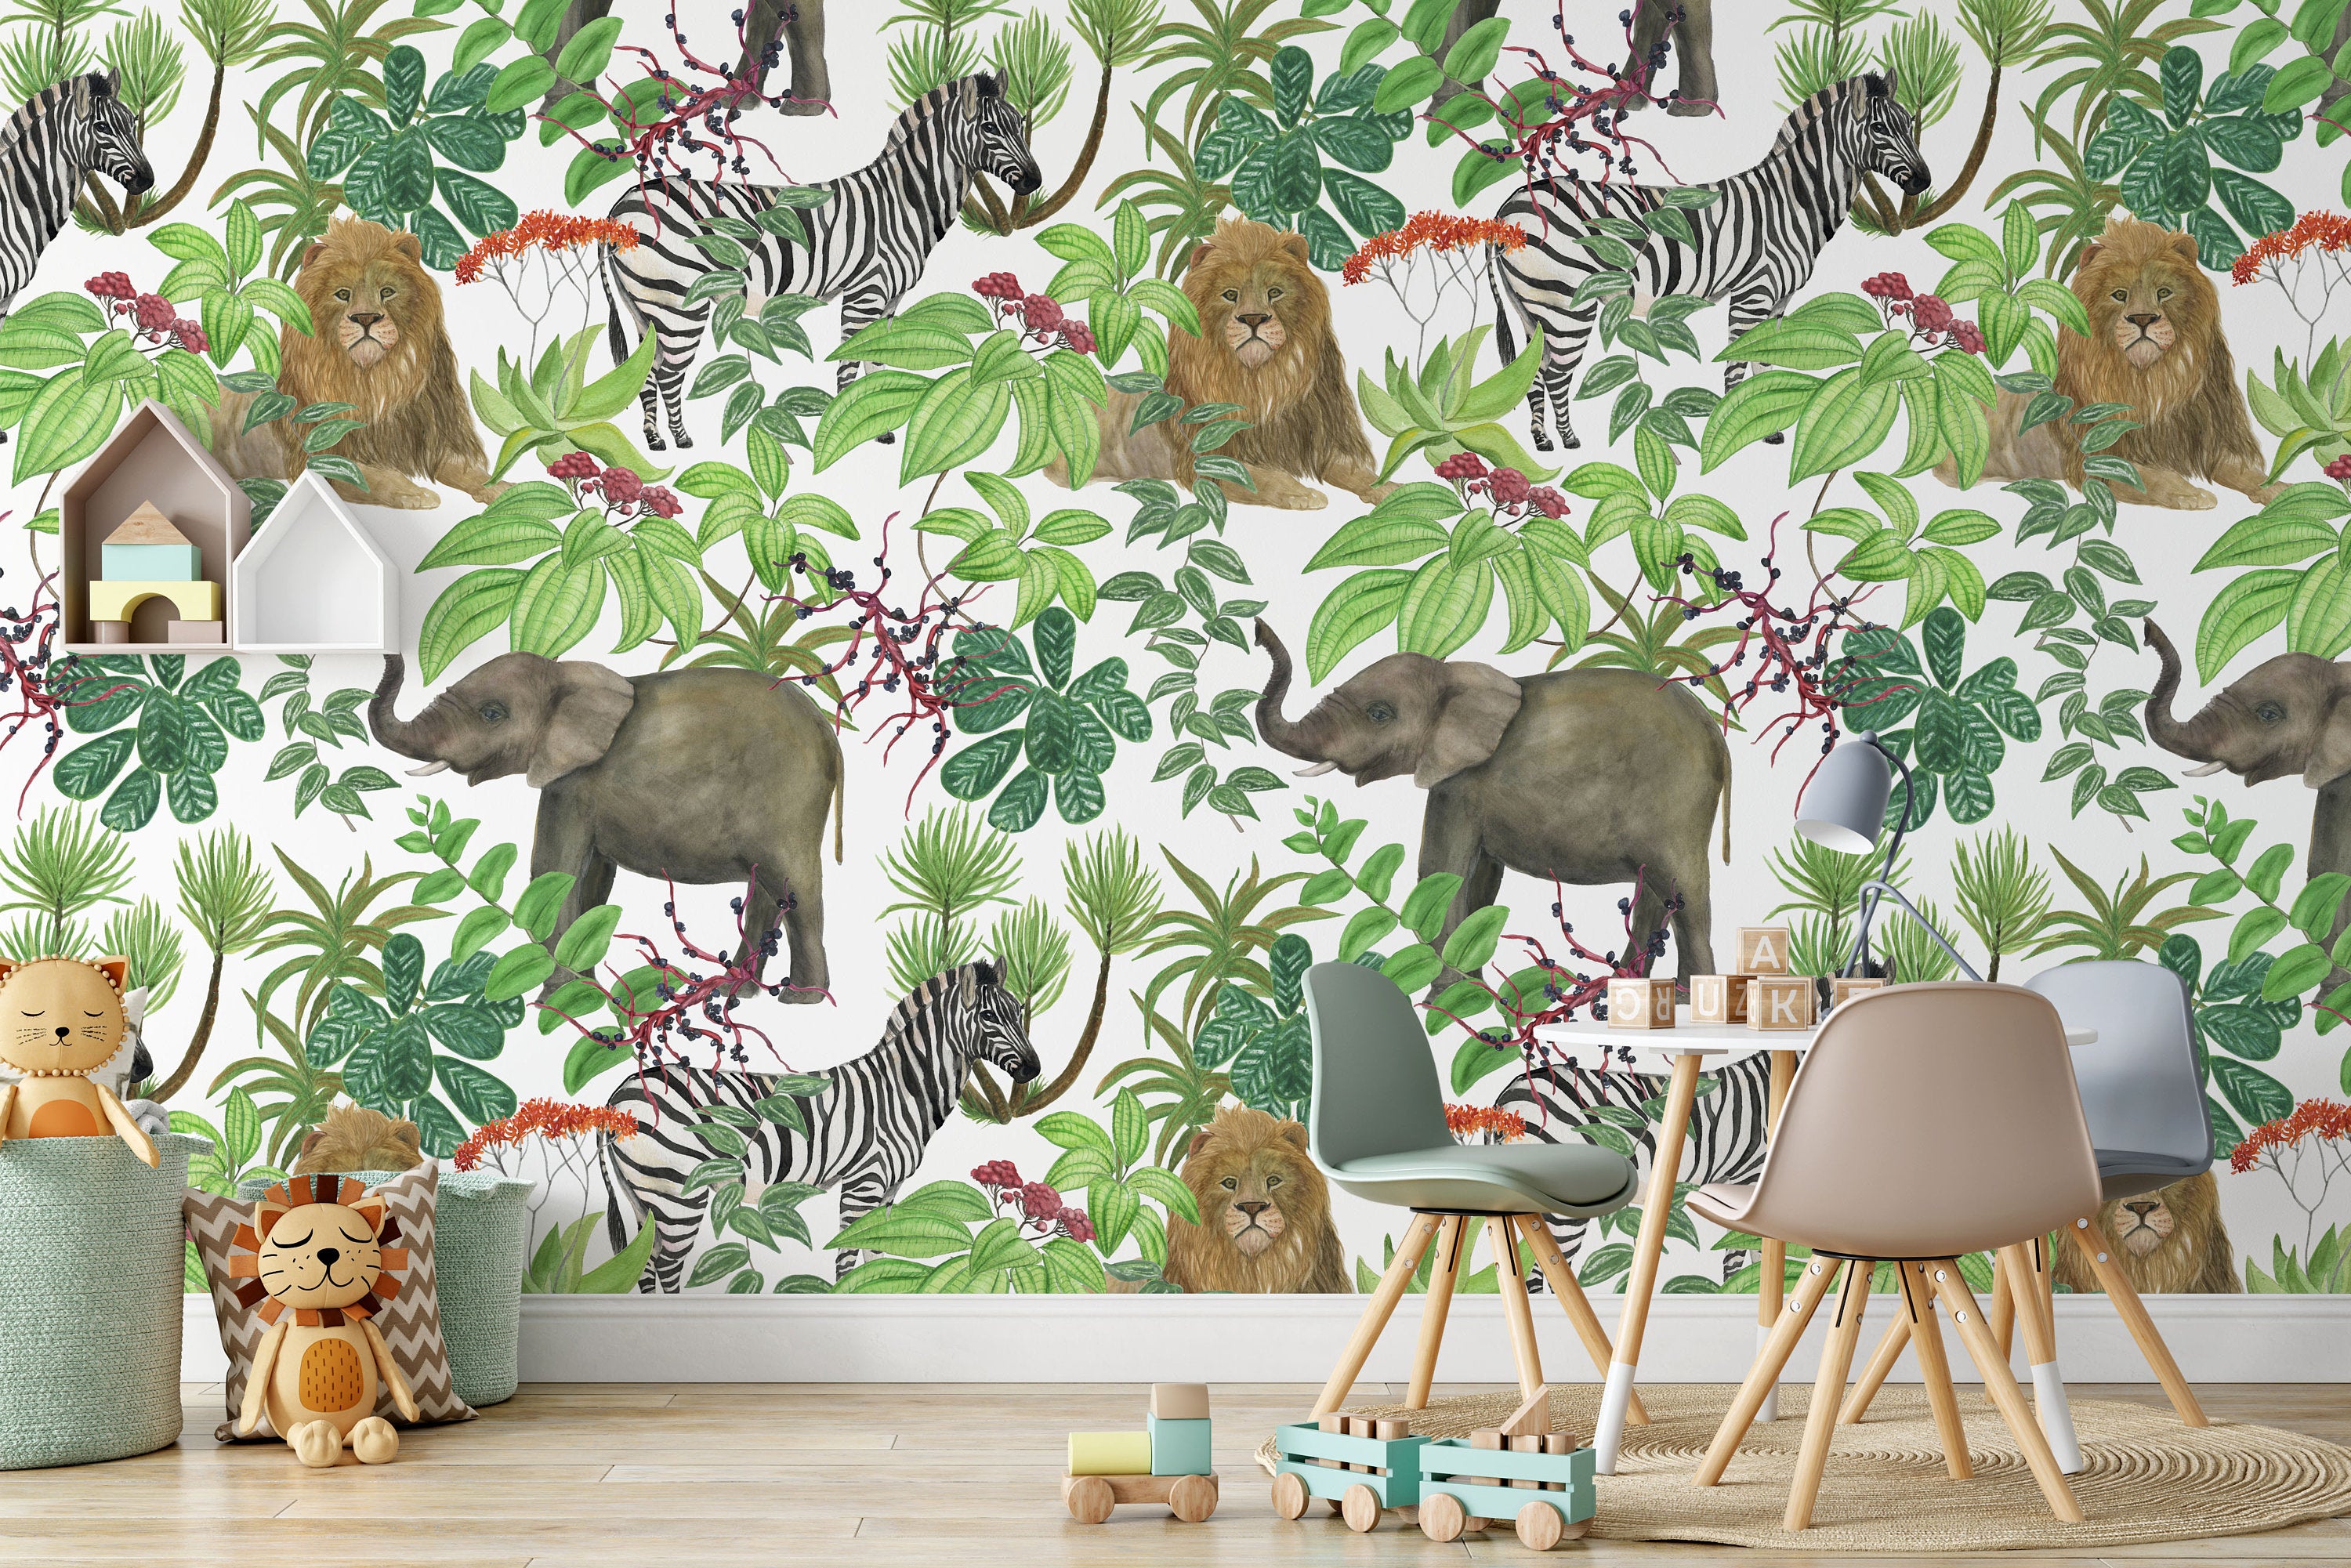 Tropical Flowers African Animals Zebra Elephant Lion Wallpaper Self Adhesive Peel and Stick Wall Sticker House Design Removable